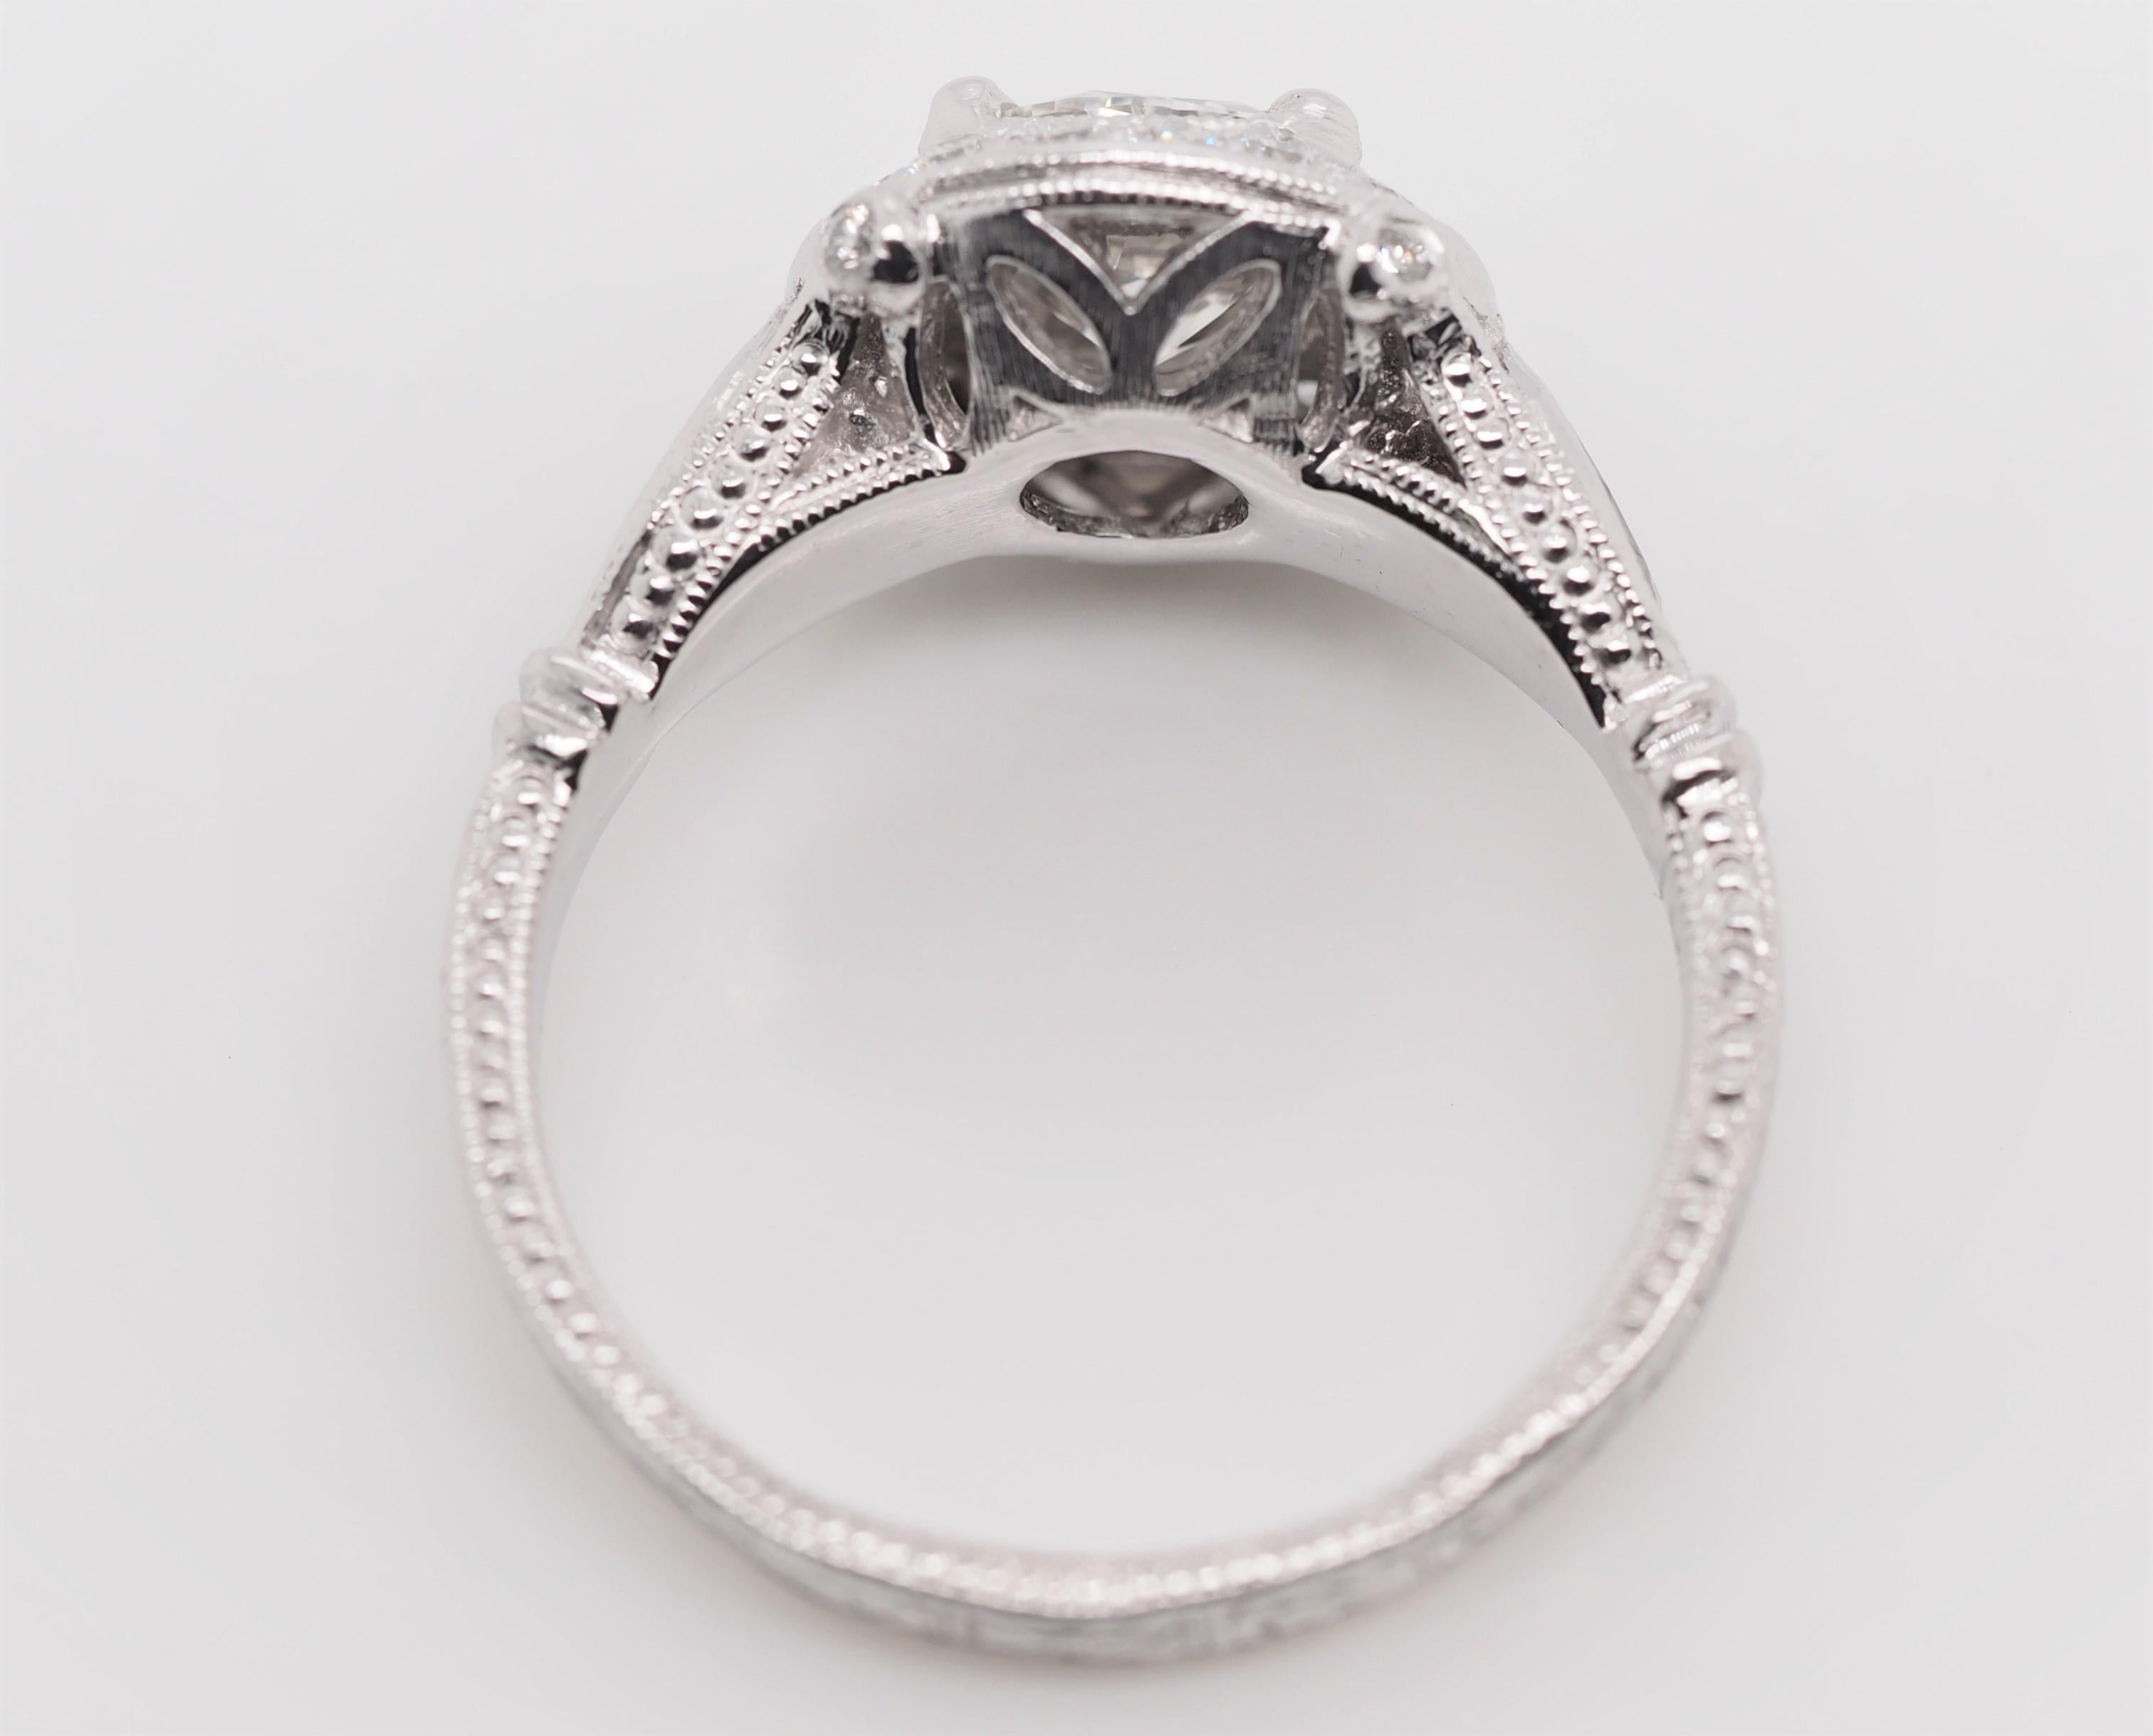 Carrie Underwood GIA 1.03 Carat Round Cut Diamond Platinum Halo Engagement Ring In Excellent Condition For Sale In Addison, TX